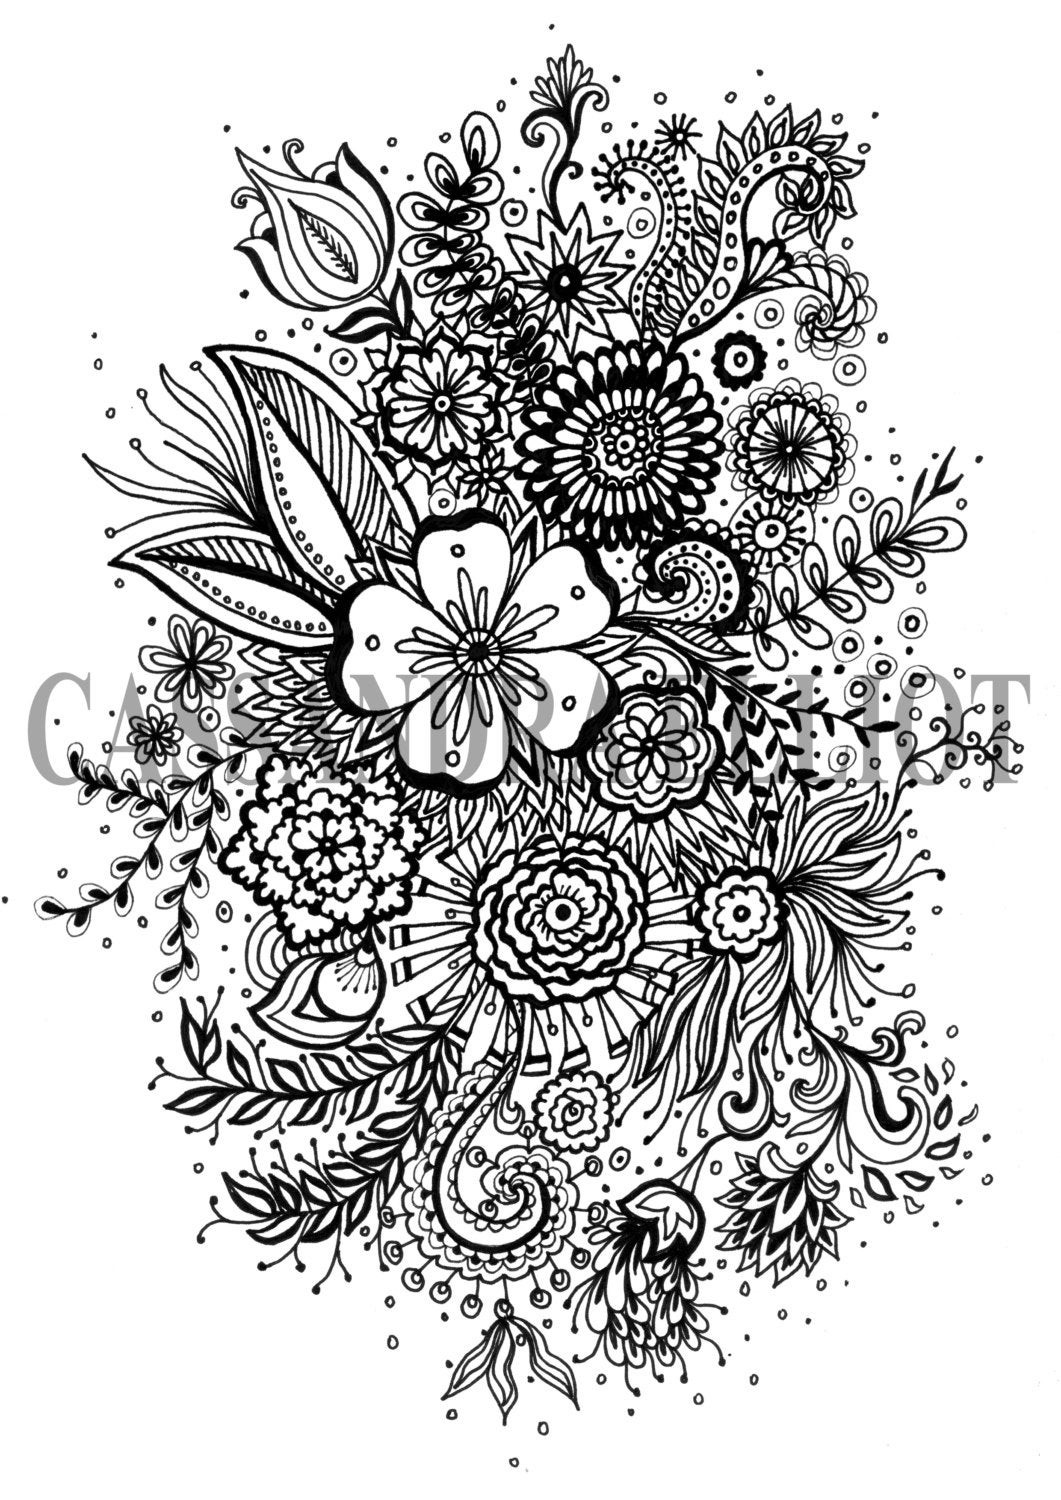 Adult Coloring Pages Free Printable
 Printable Adult Colouring Page Digital Download Print Flower